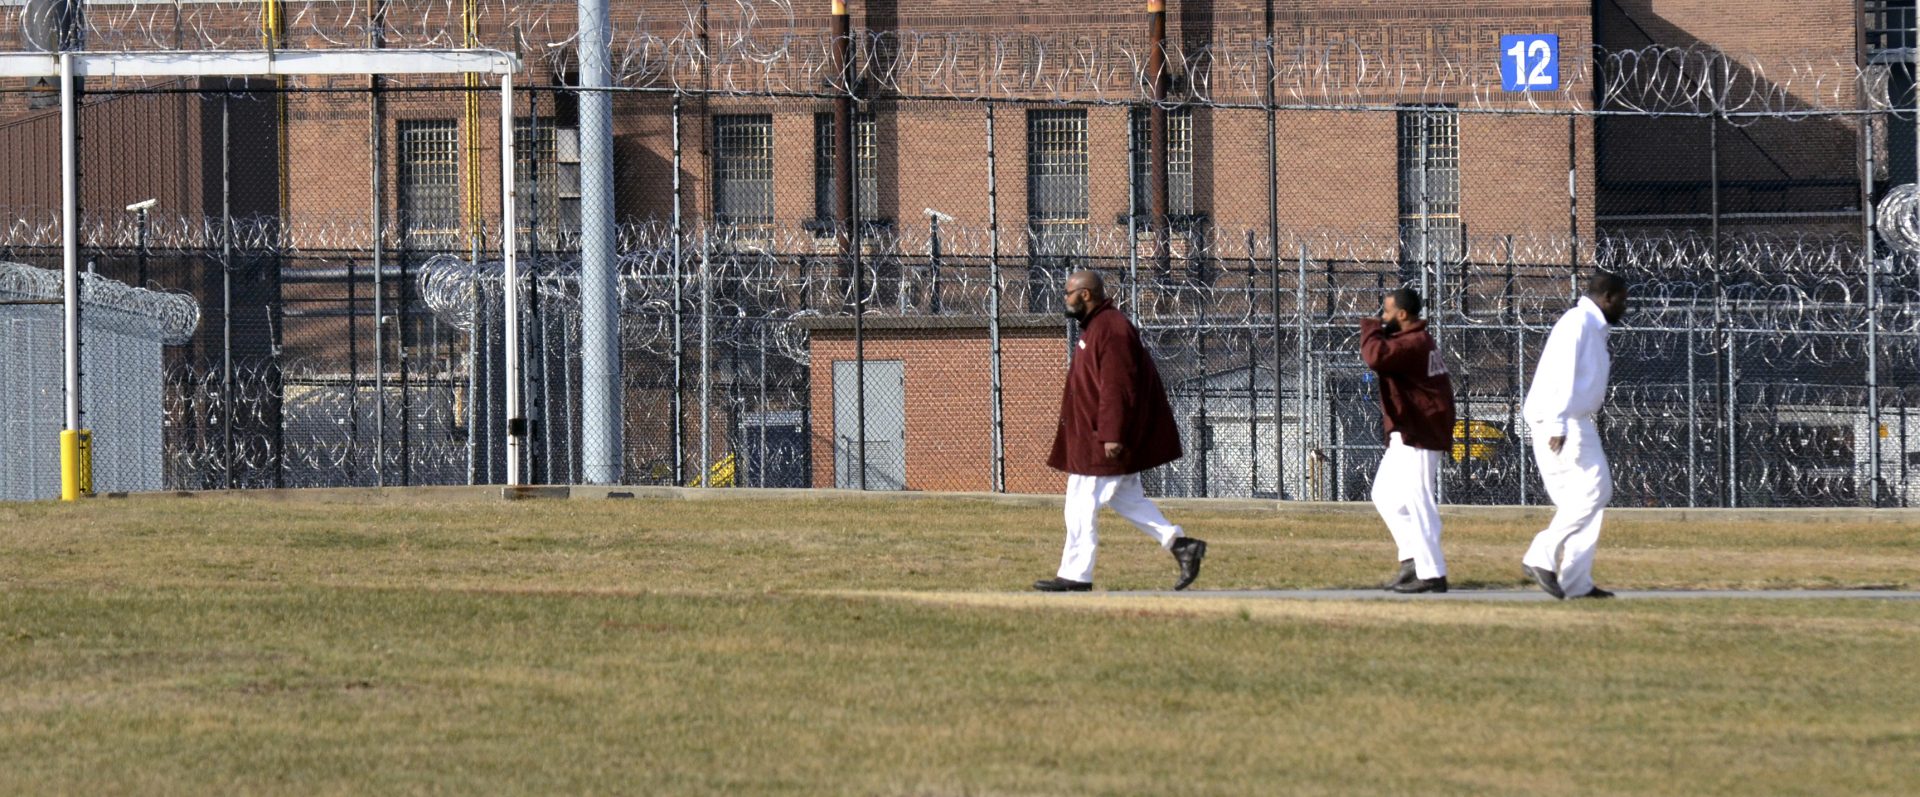 Inmates walk across a yard at the State Correctional Institution at Camp Hill, Pennsylvania, Friday, Jan. 13, 2017, in Camp Hill, Pa.